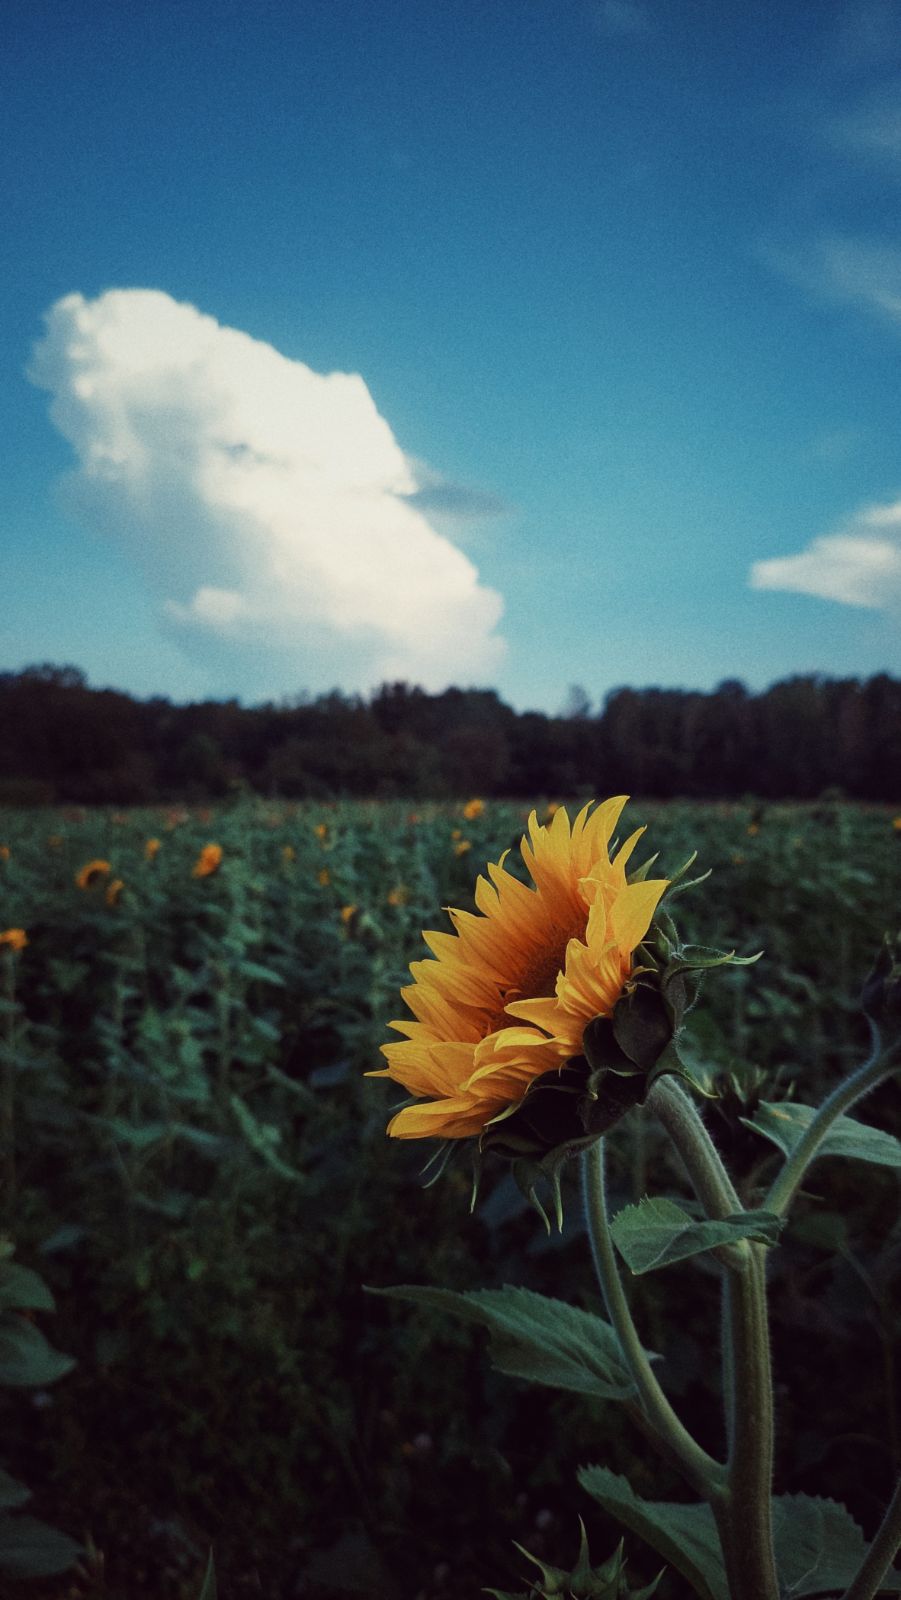 Sunflowers, evening sky, a huge cloud building up over the forest.